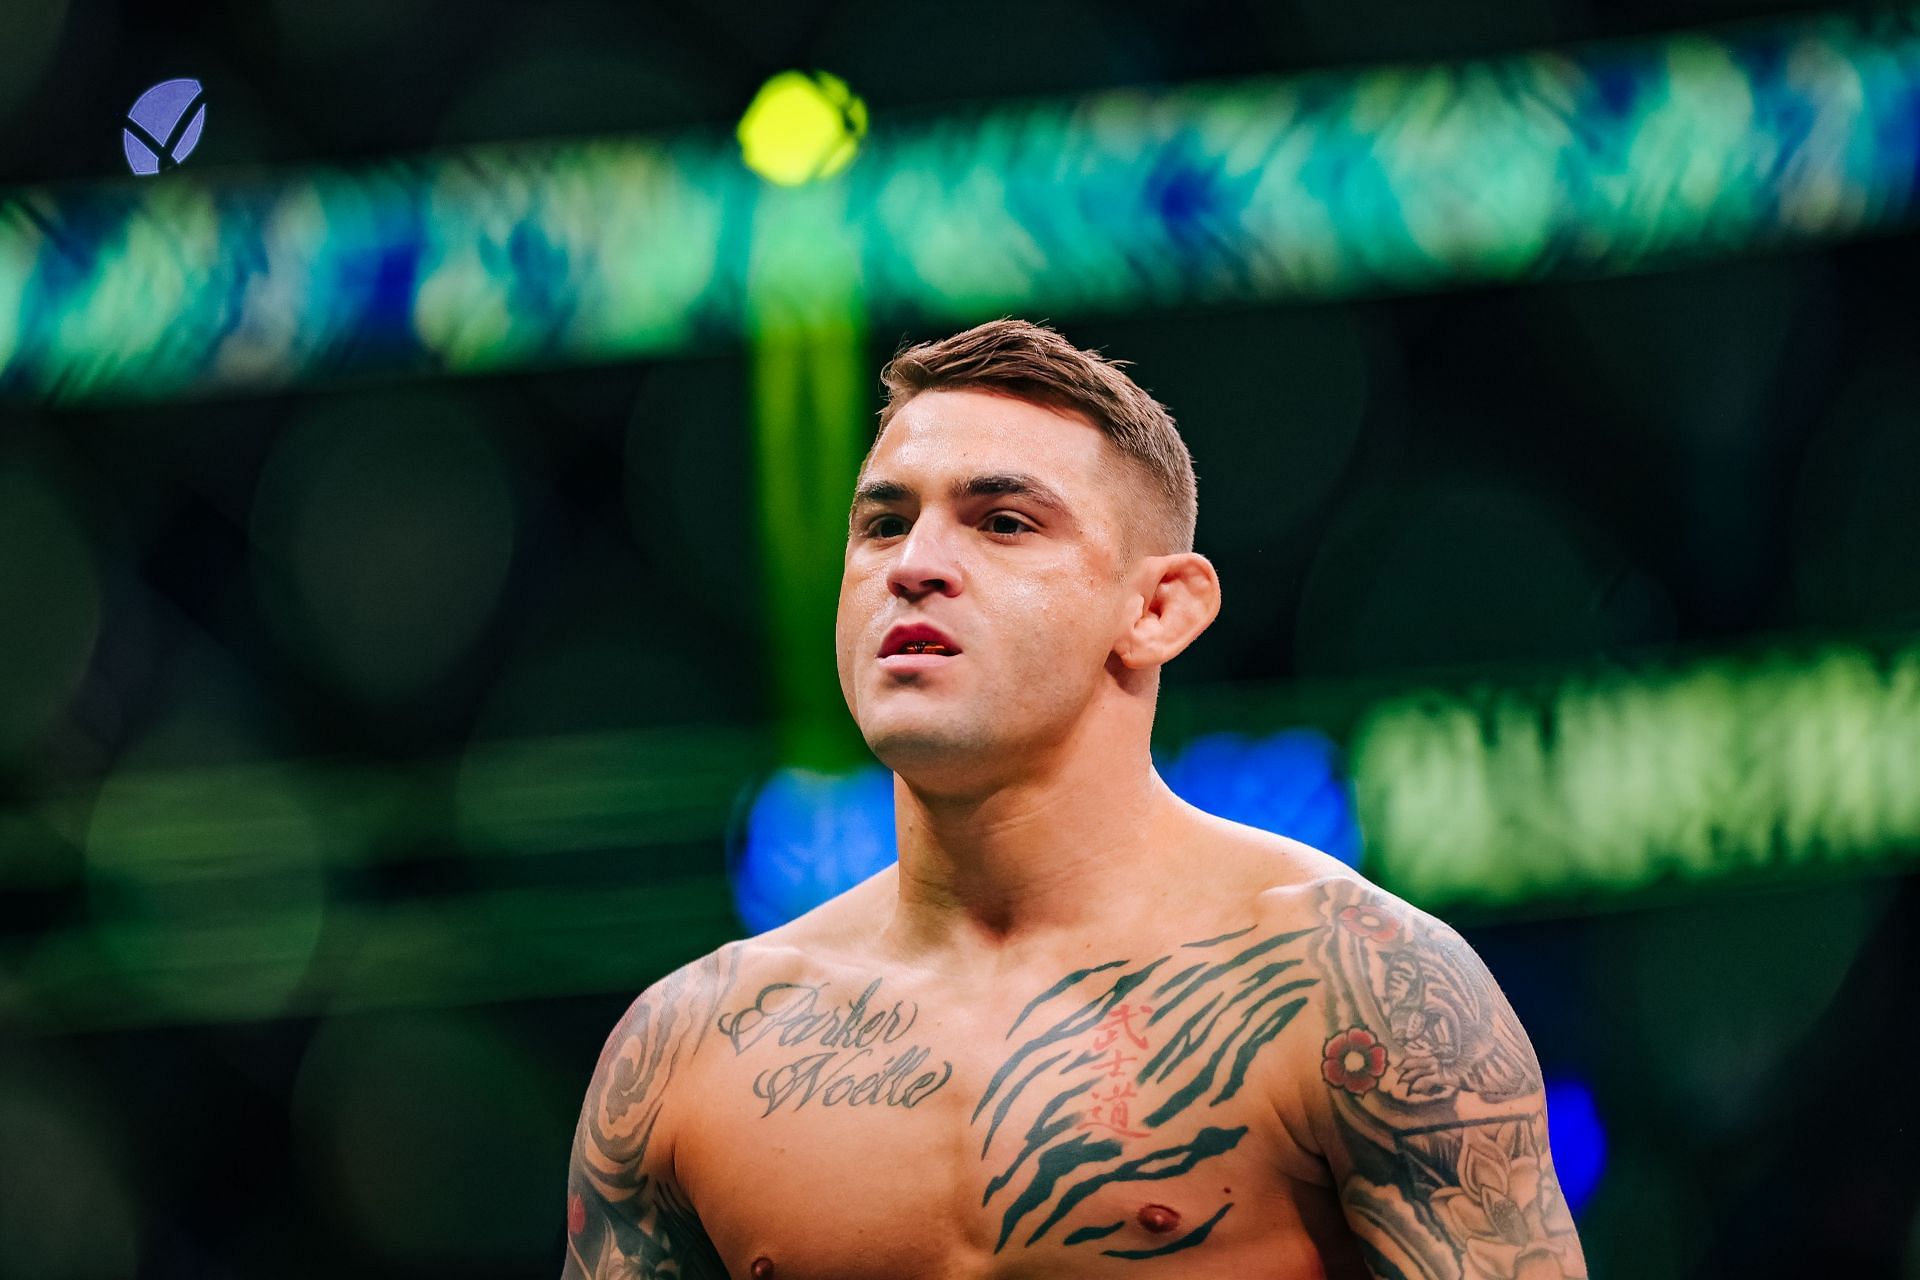 On paper, it feels difficult to pick a winner between Dustin Poirier and Michael Chandler